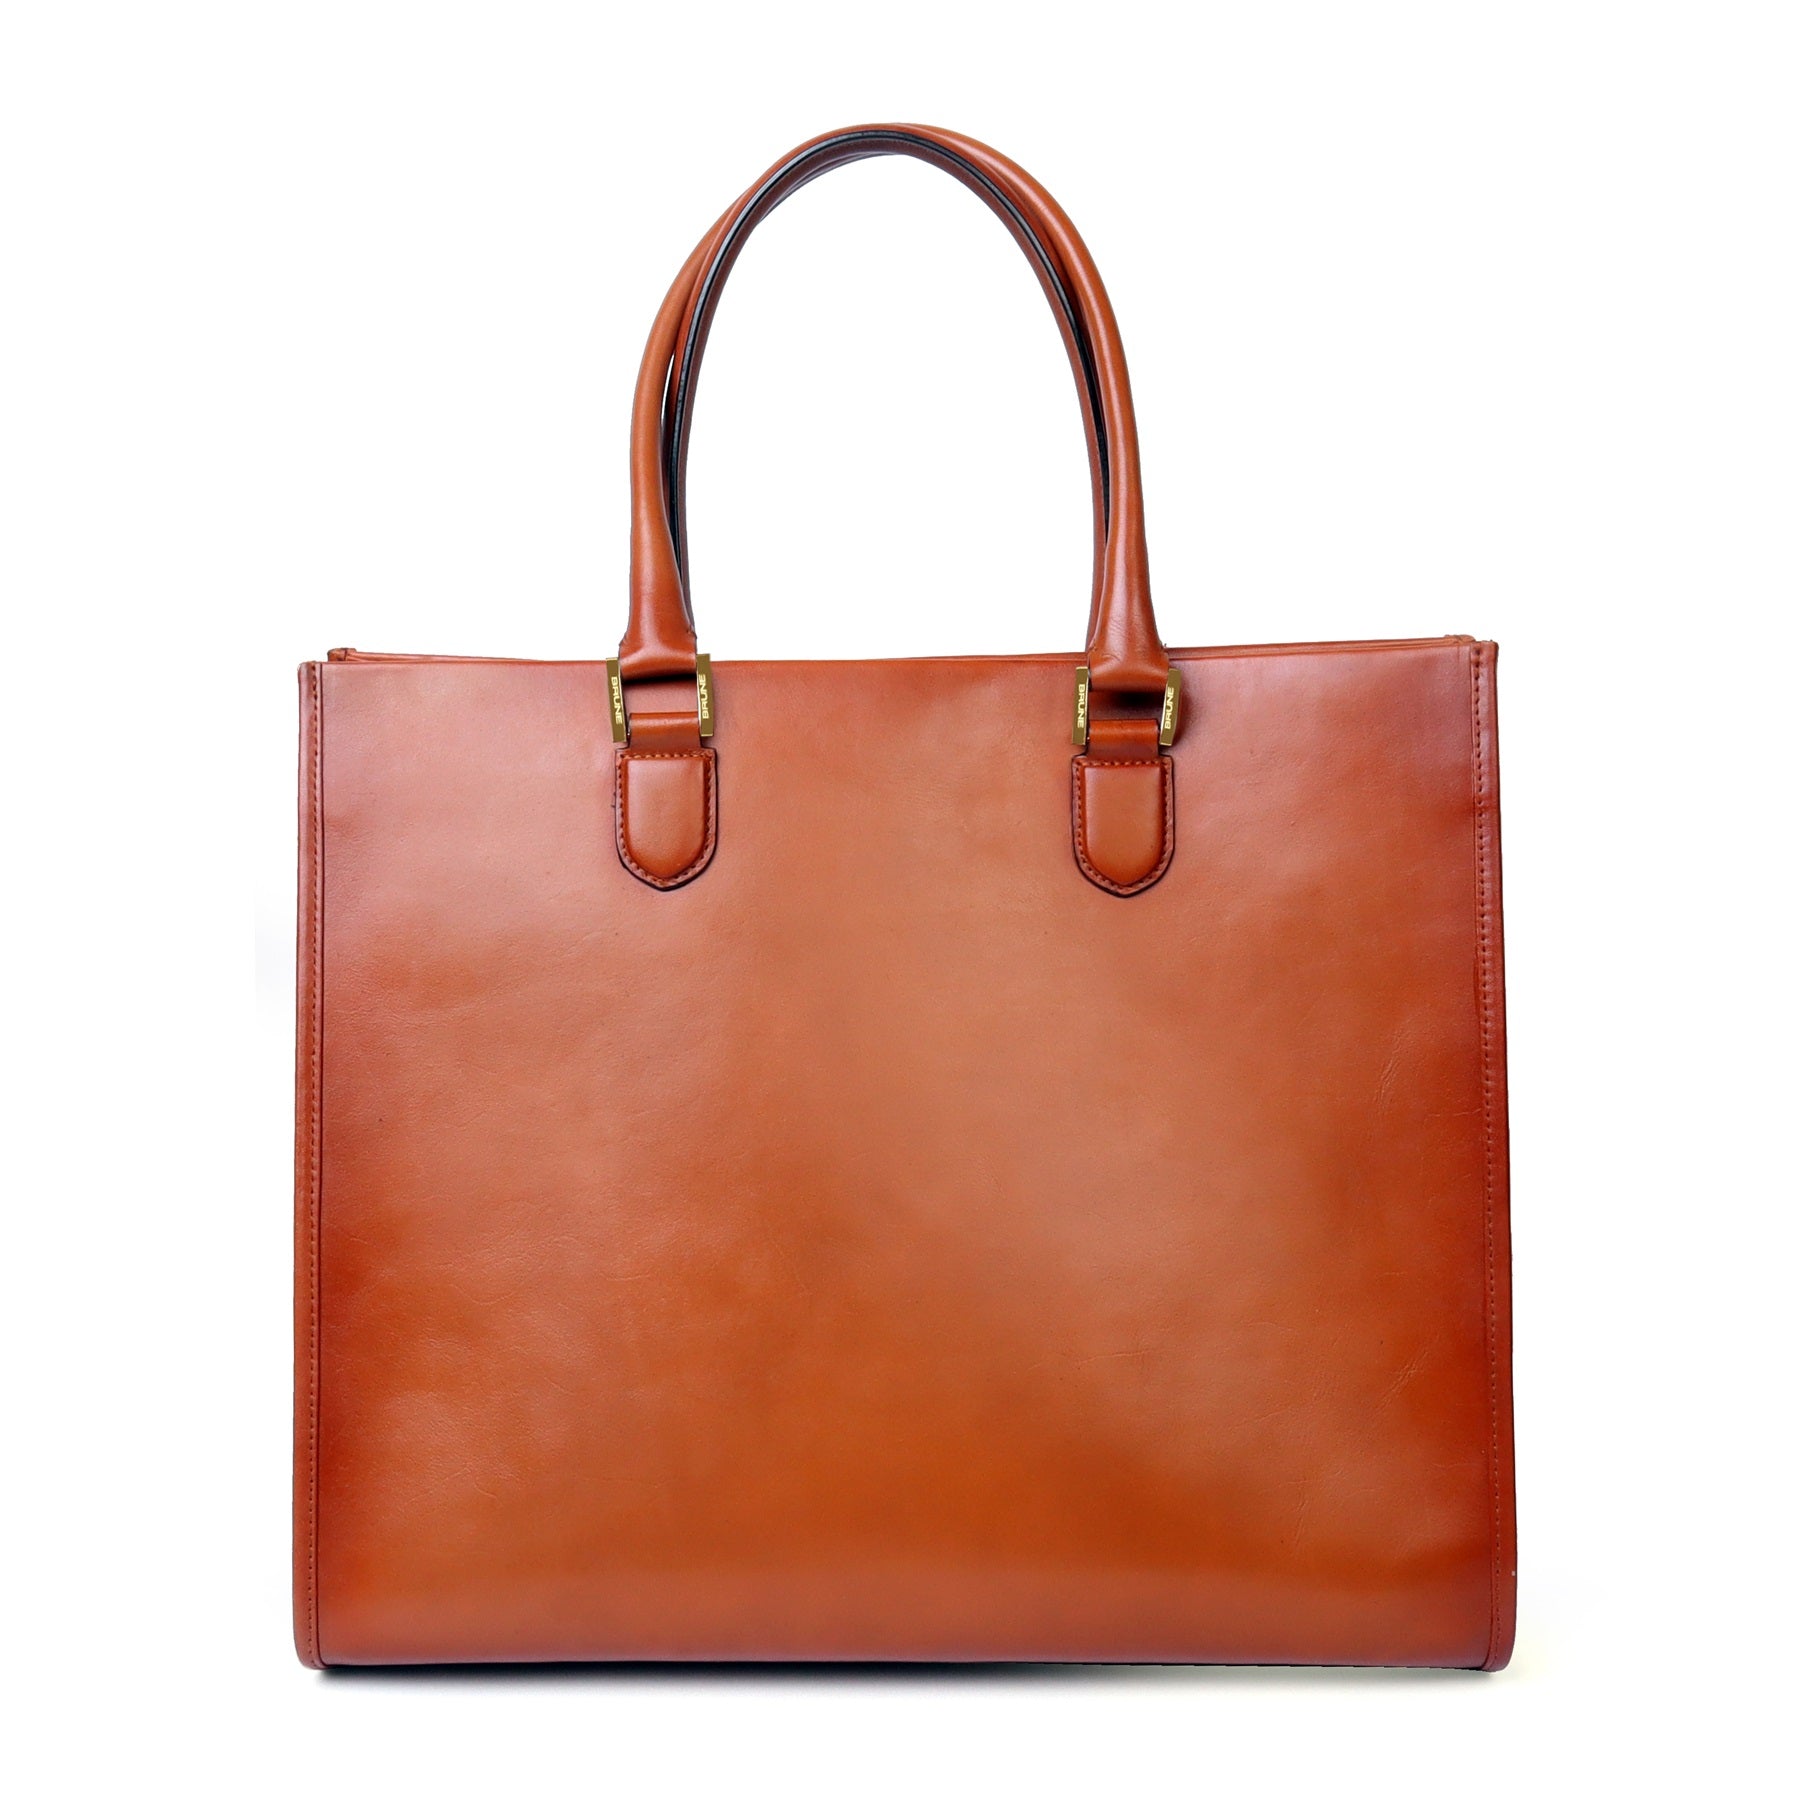 All kinds of leather bags repair and cleaning near me